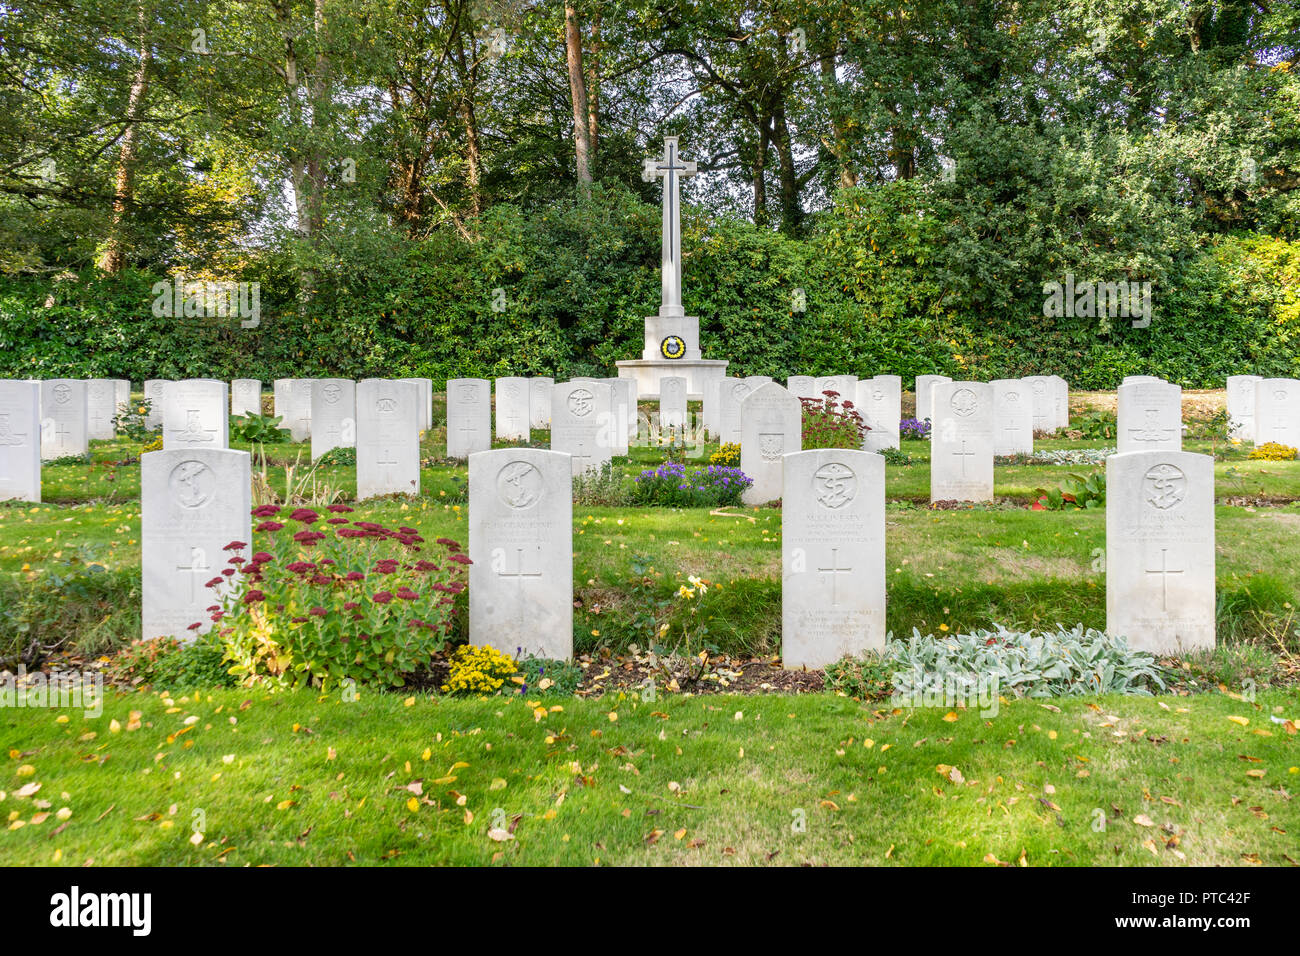 Rows of WW2 fallen soldiers graves and war memorial at Hollybrook Cemetery in Southampton, Hampshire, England, UK Stock Photo